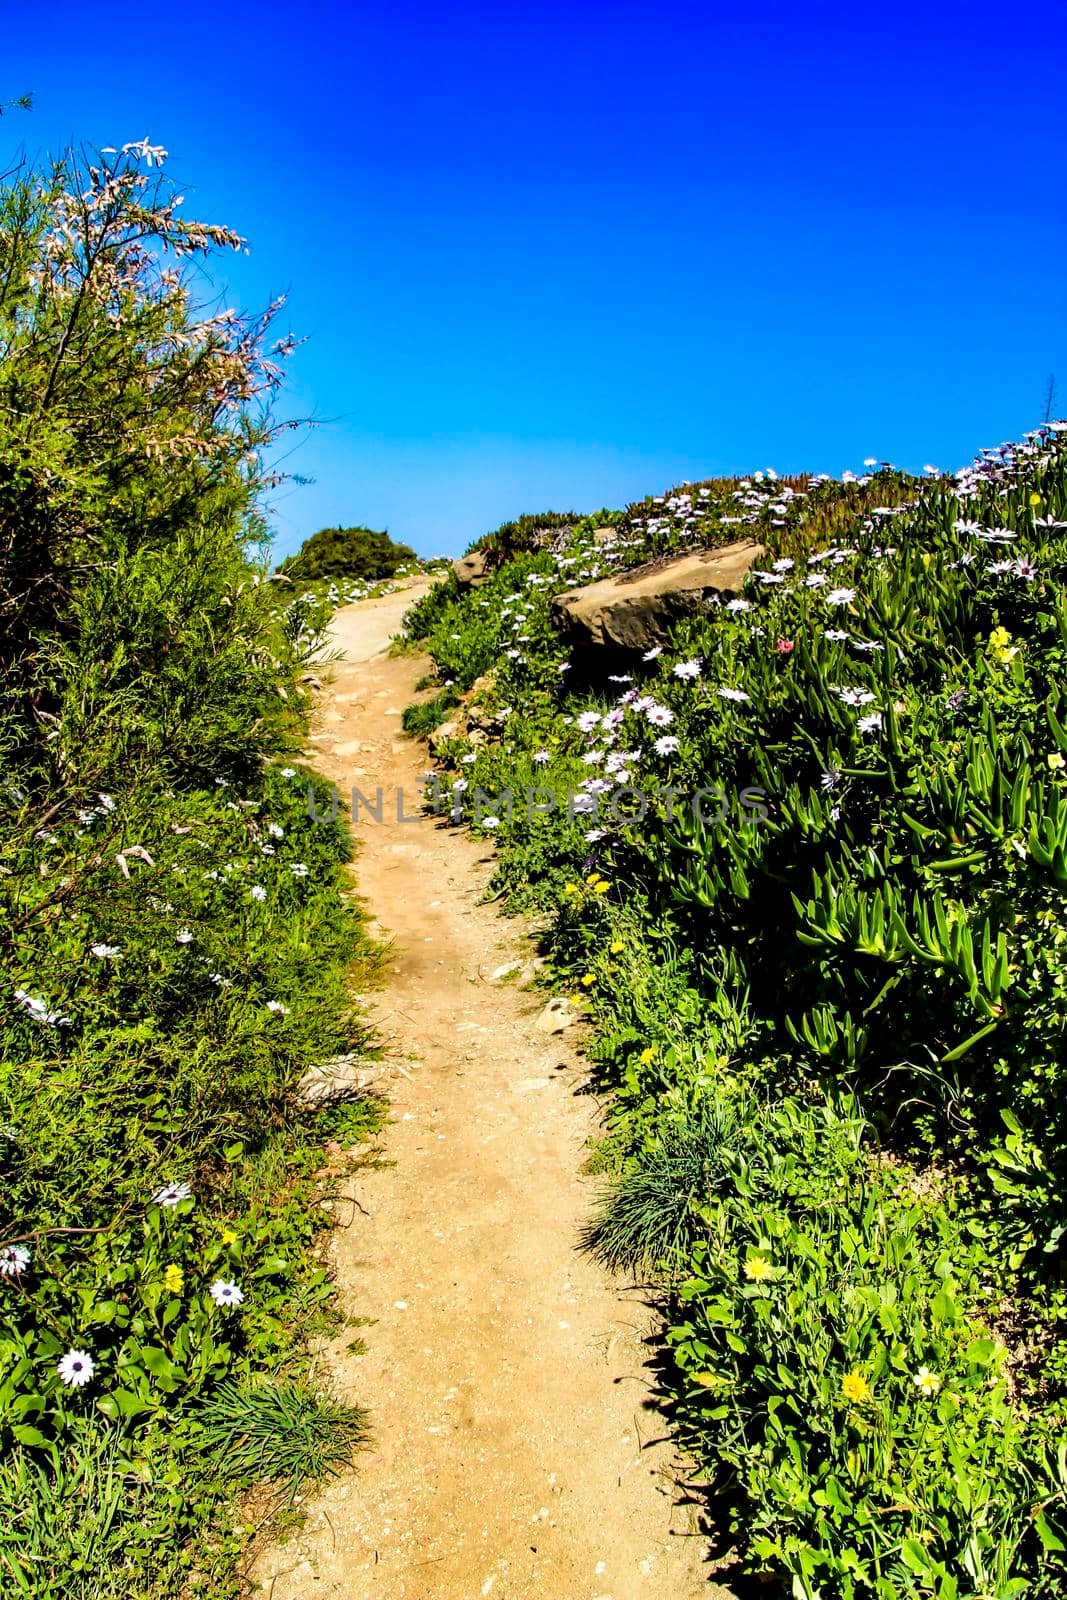 Path between green vegetation and flowers under blue sky in spring in Azenhas do Mar village, Lisbon, Portugal